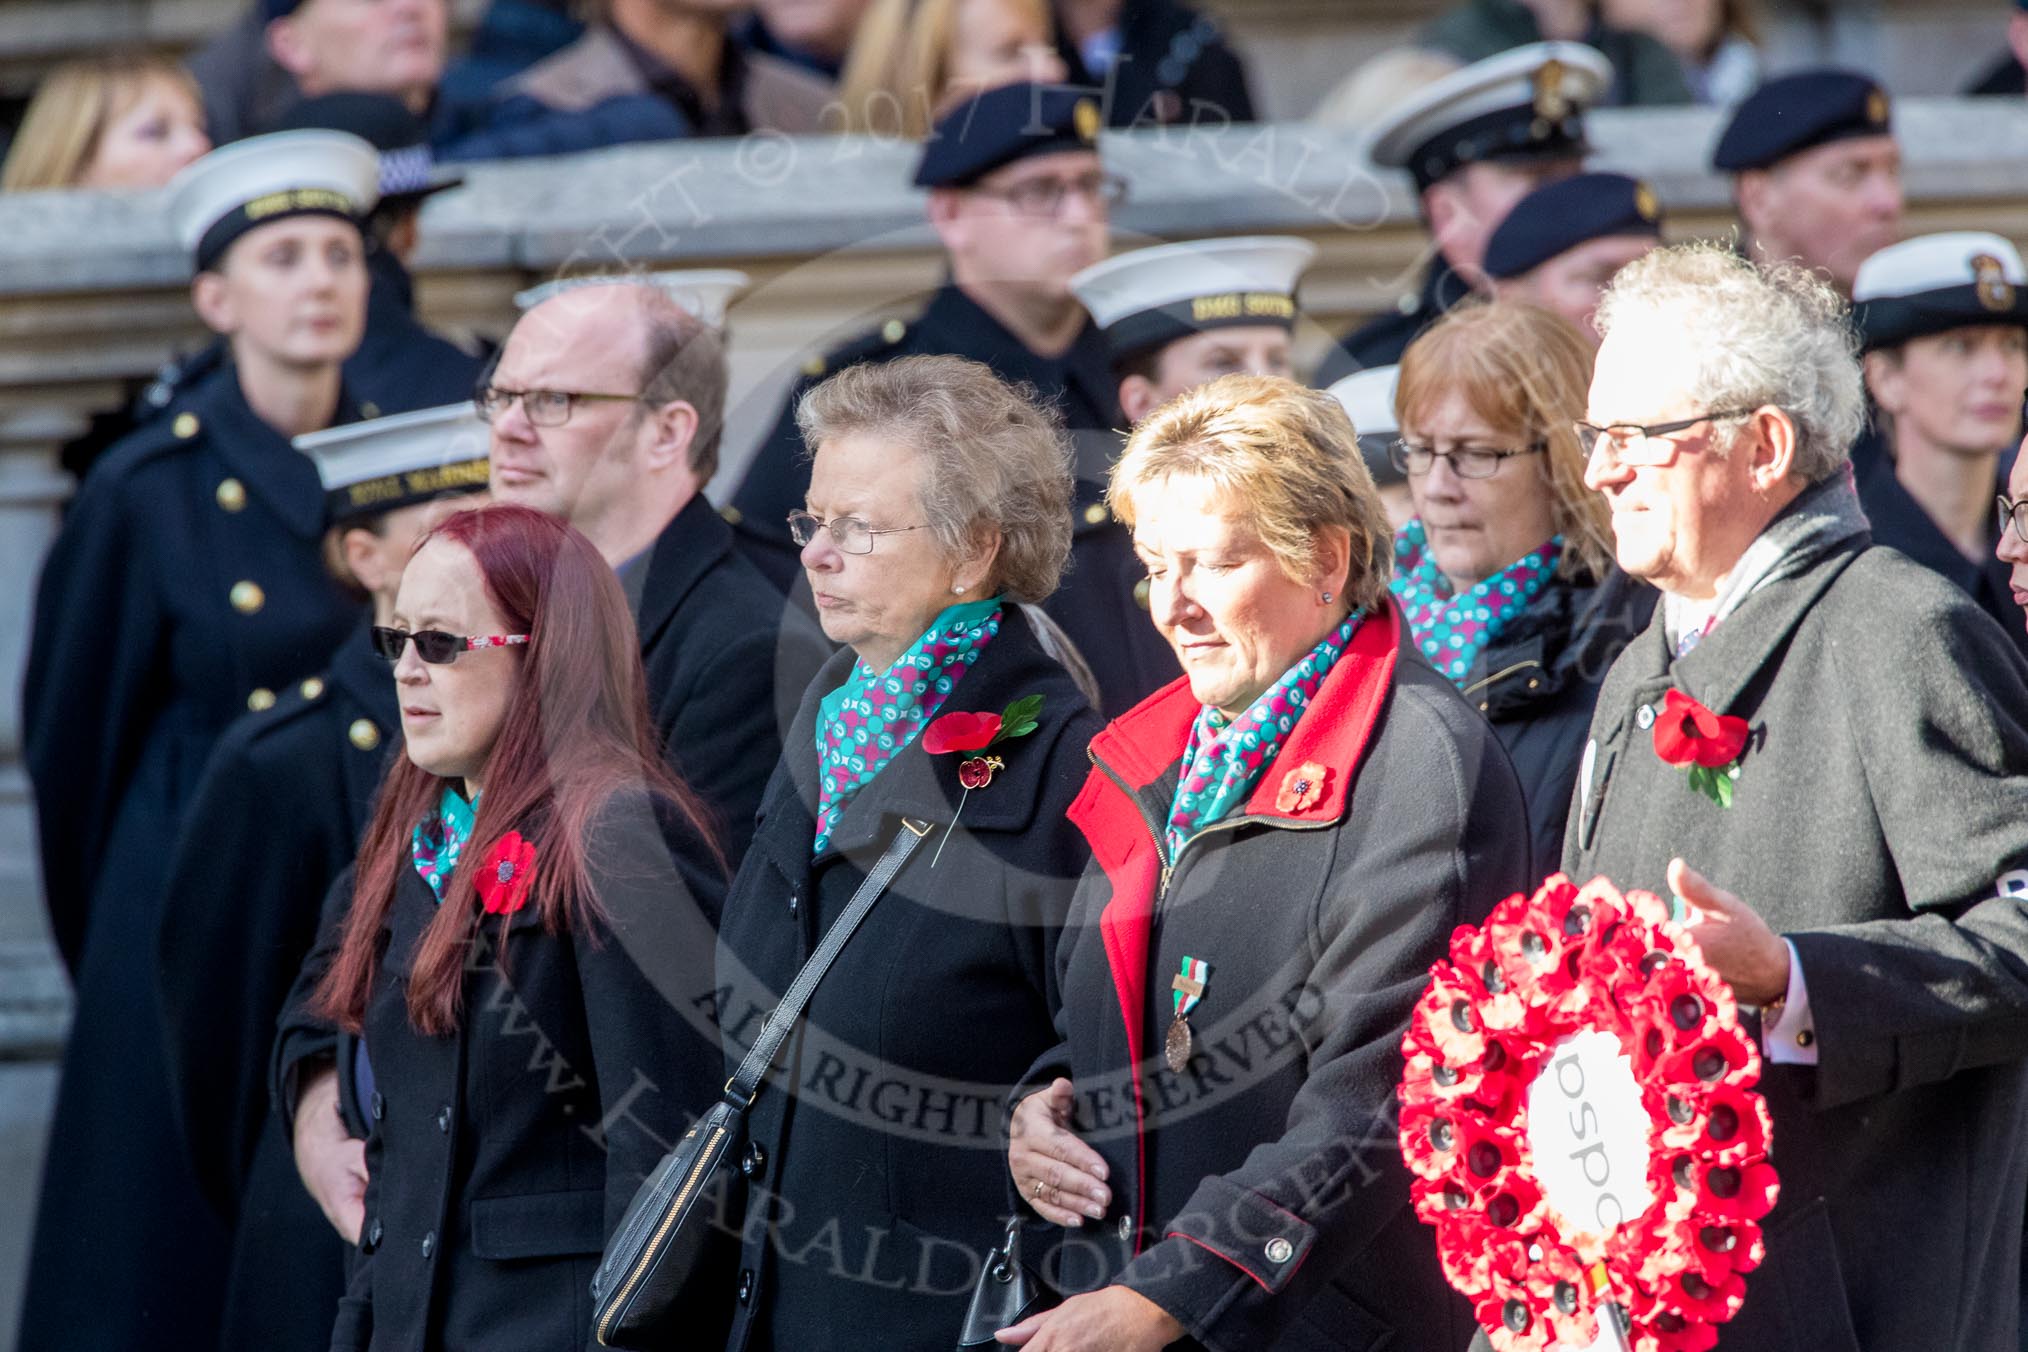 PDSA (Group M21, 36 members) during the Royal British Legion March Past on Remembrance Sunday at the Cenotaph, Whitehall, Westminster, London, 11 November 2018, 12:27.